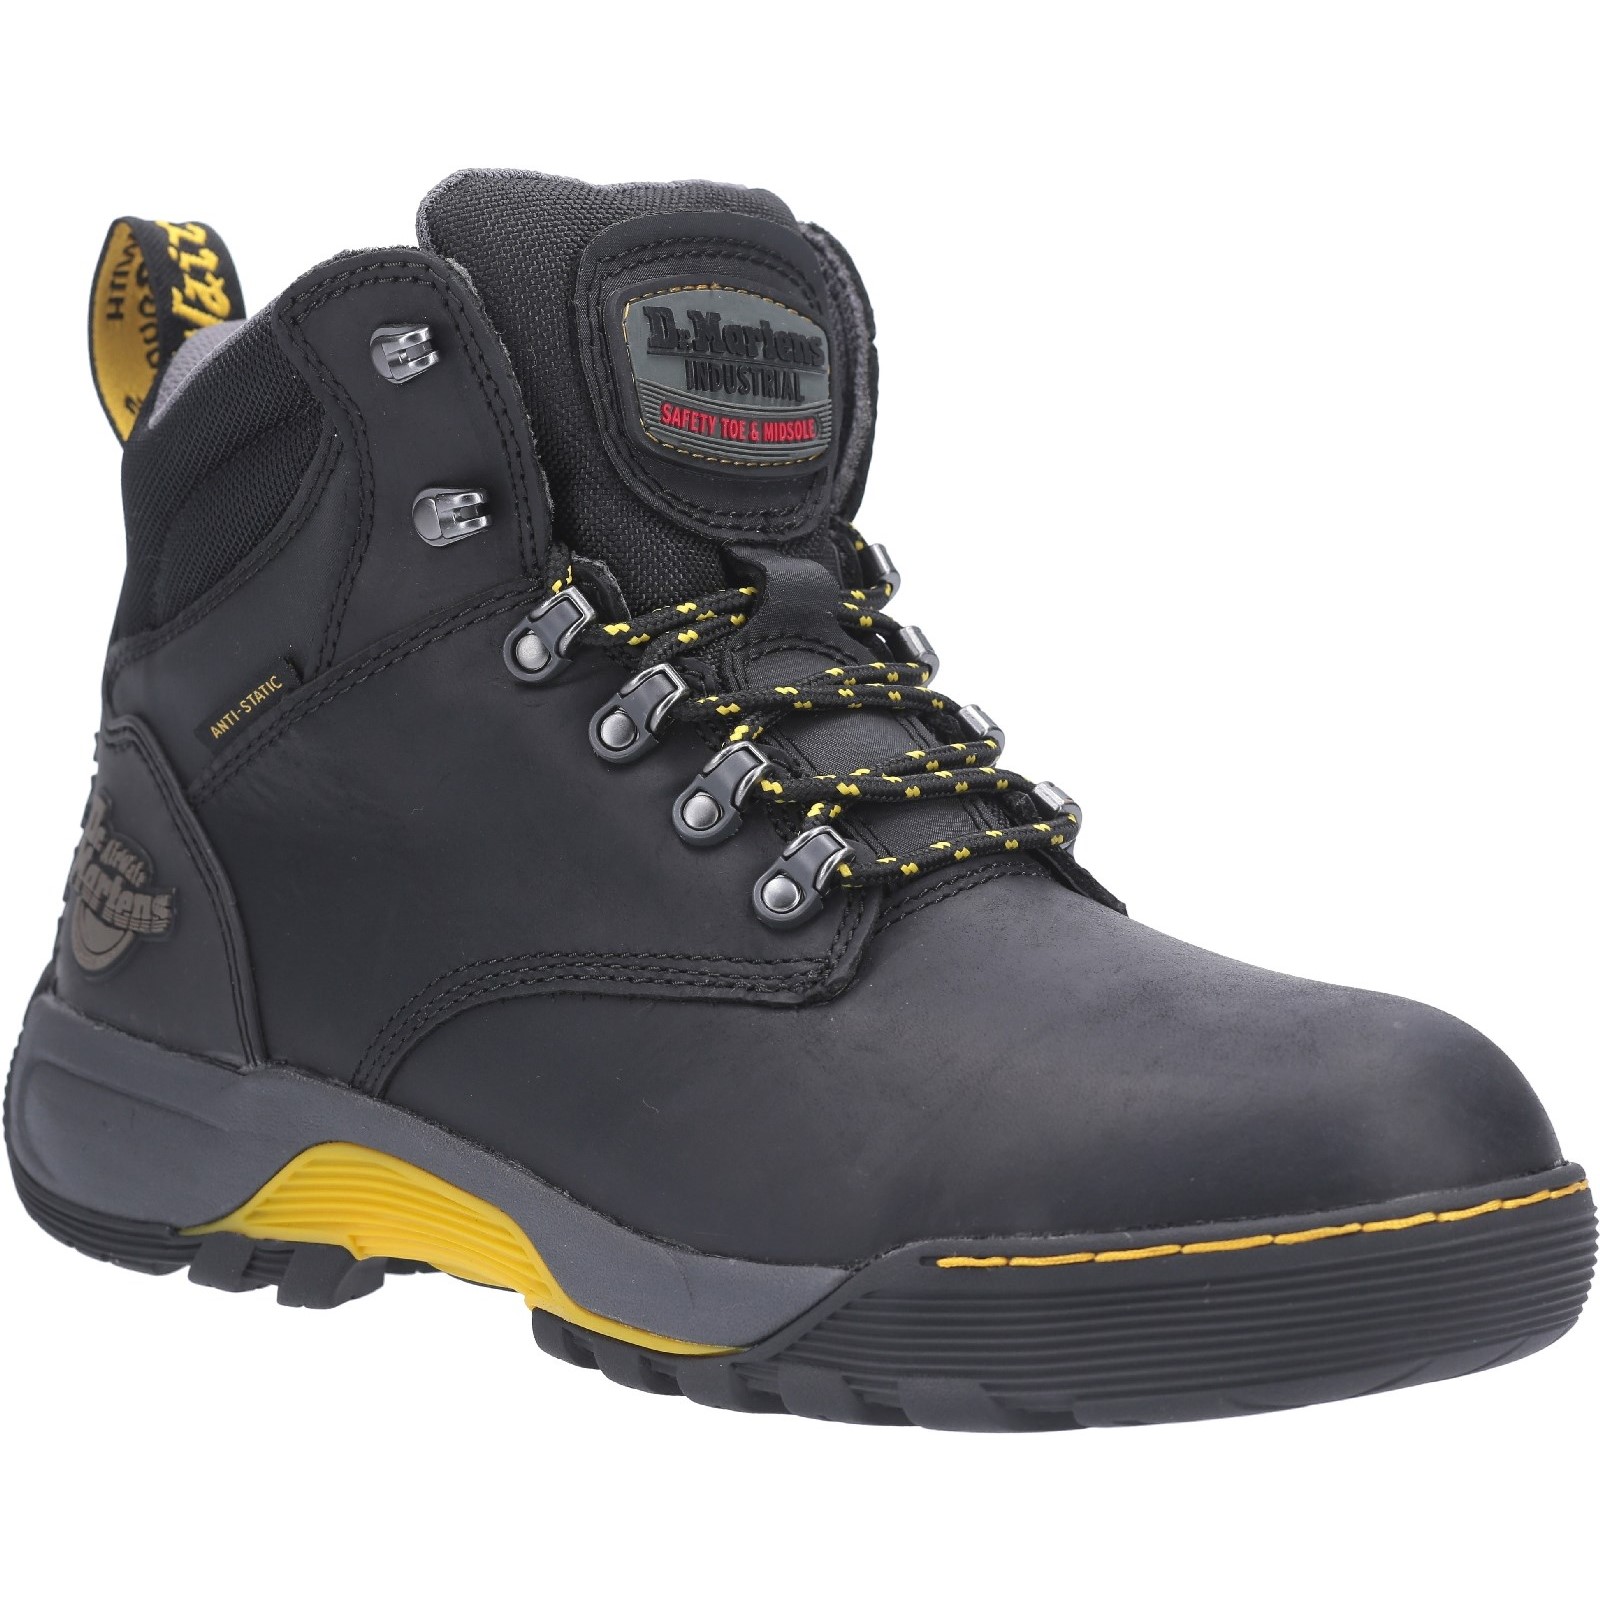 Ridge ST Lace Up Hiker Safety Boot